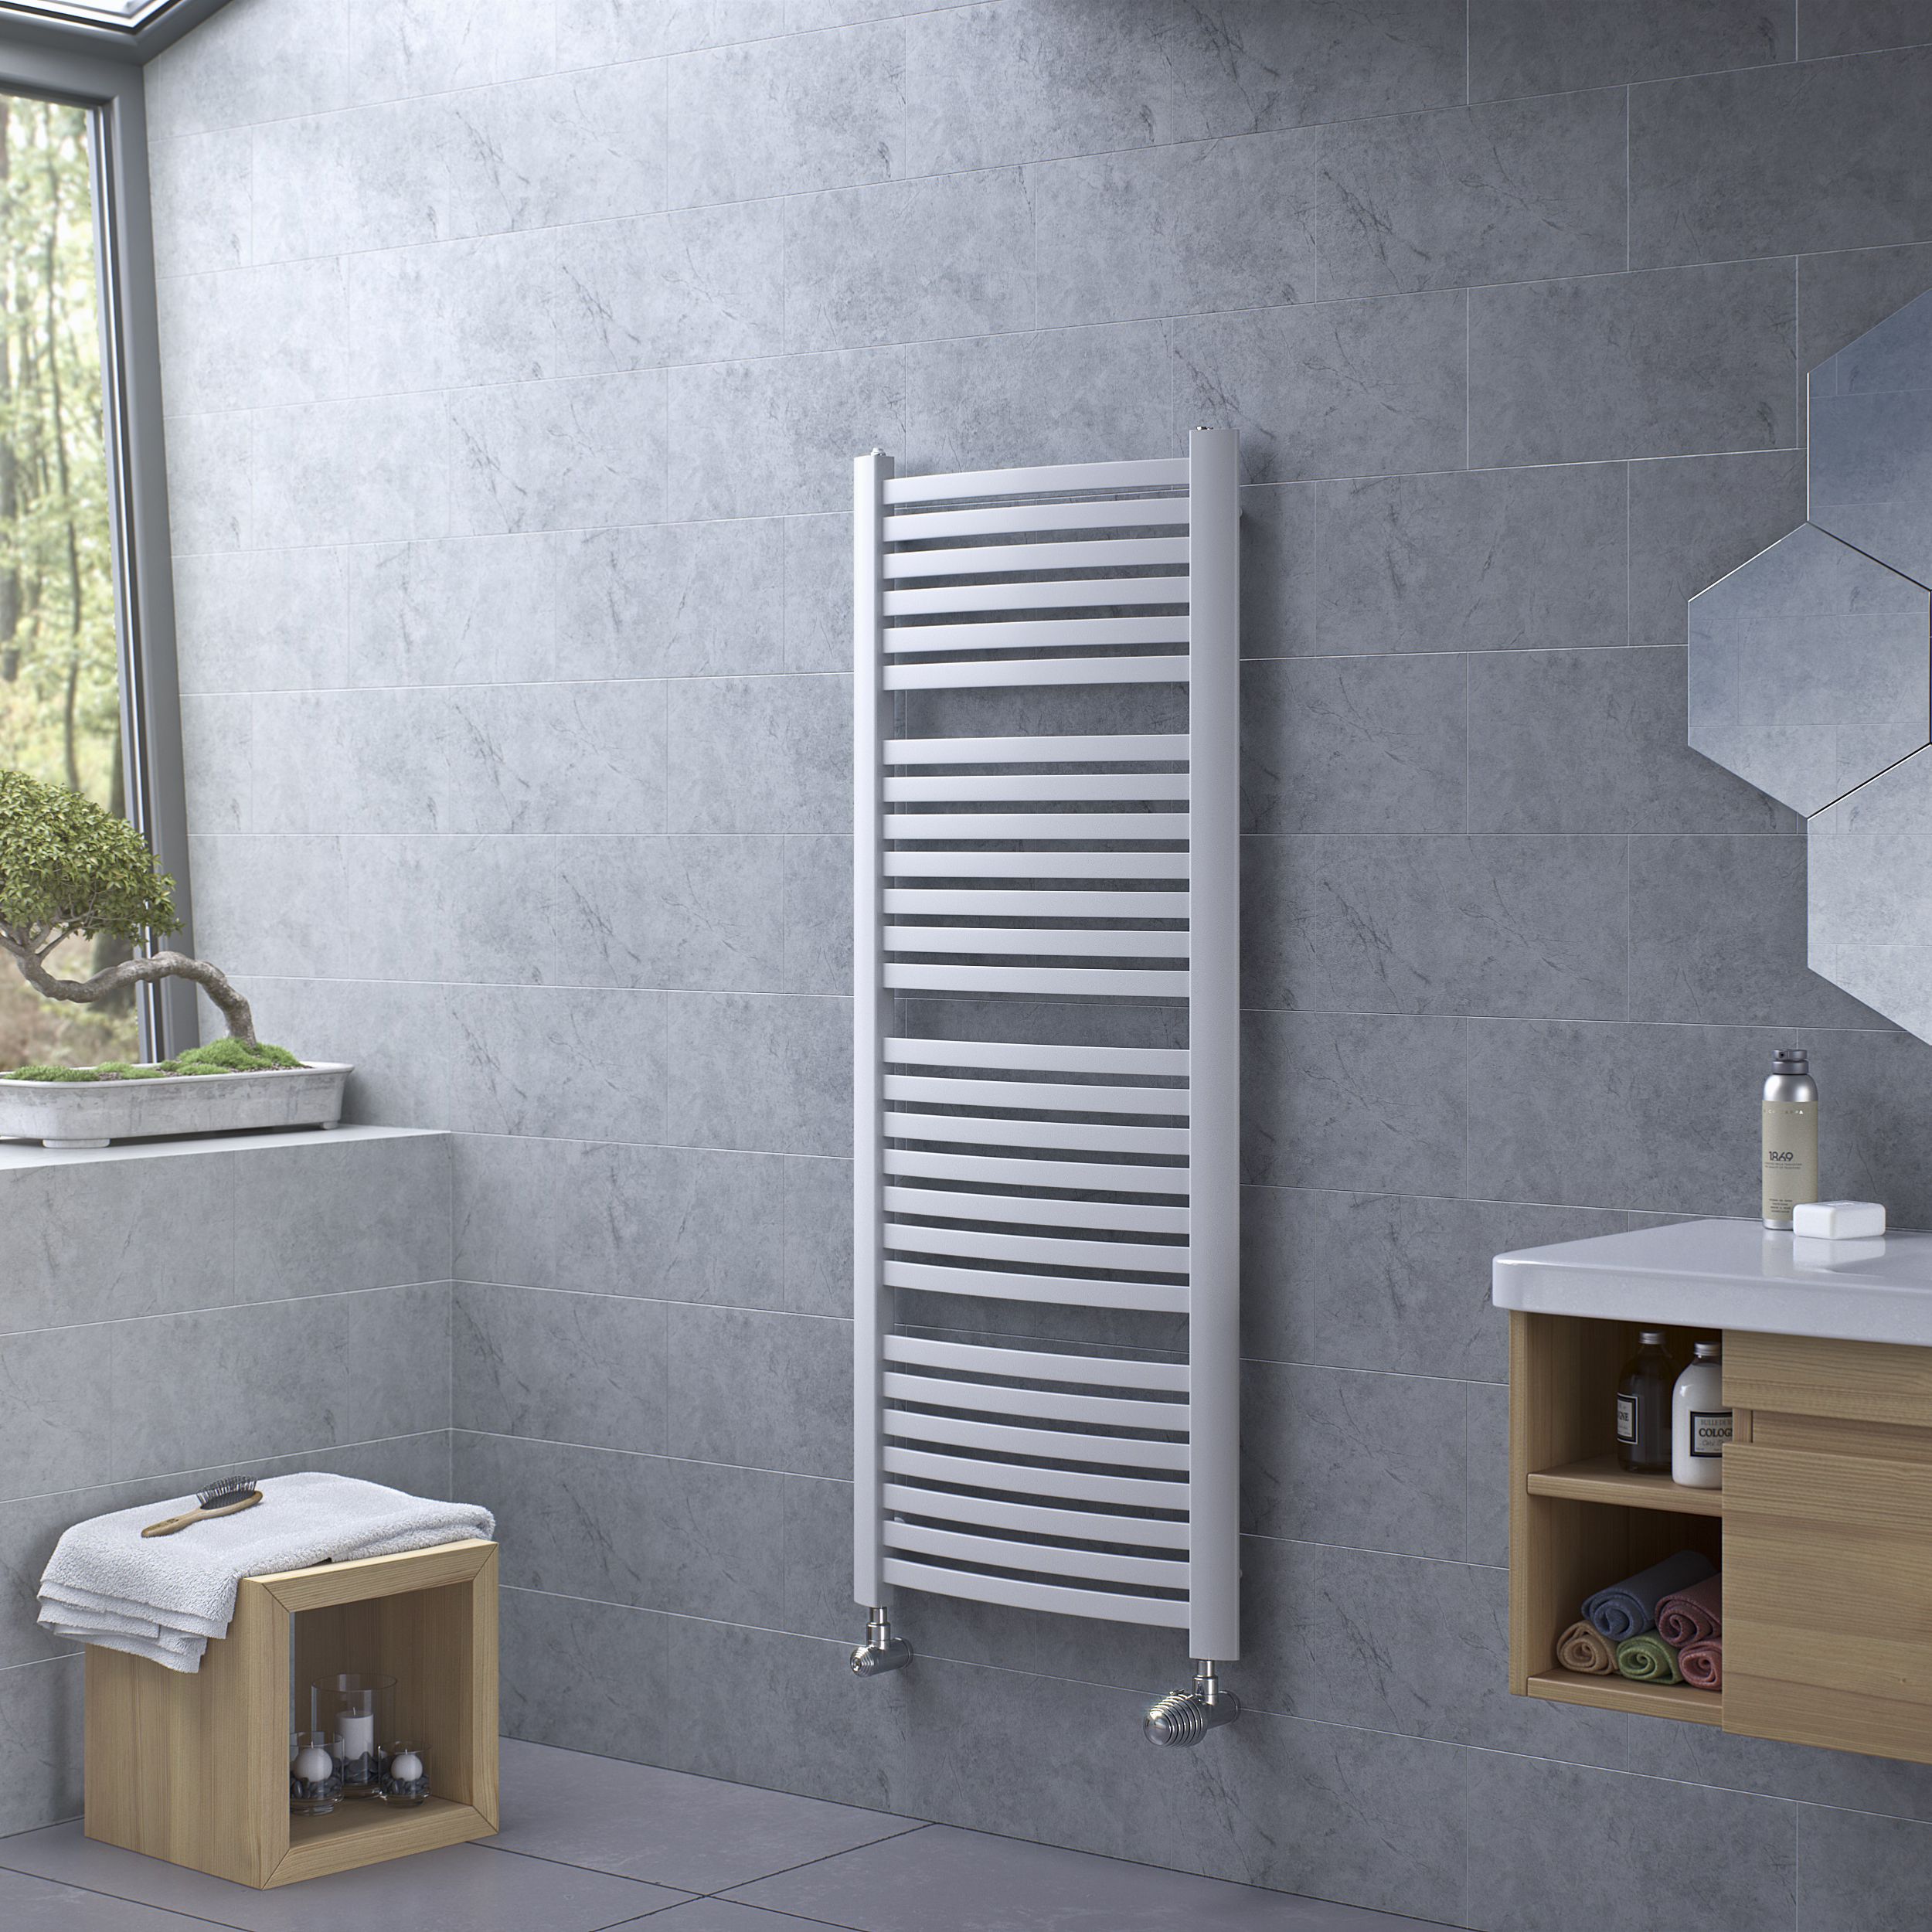 Ximax K4, White Vertical Curved Towel radiator (W)580mm x (H)1710mm